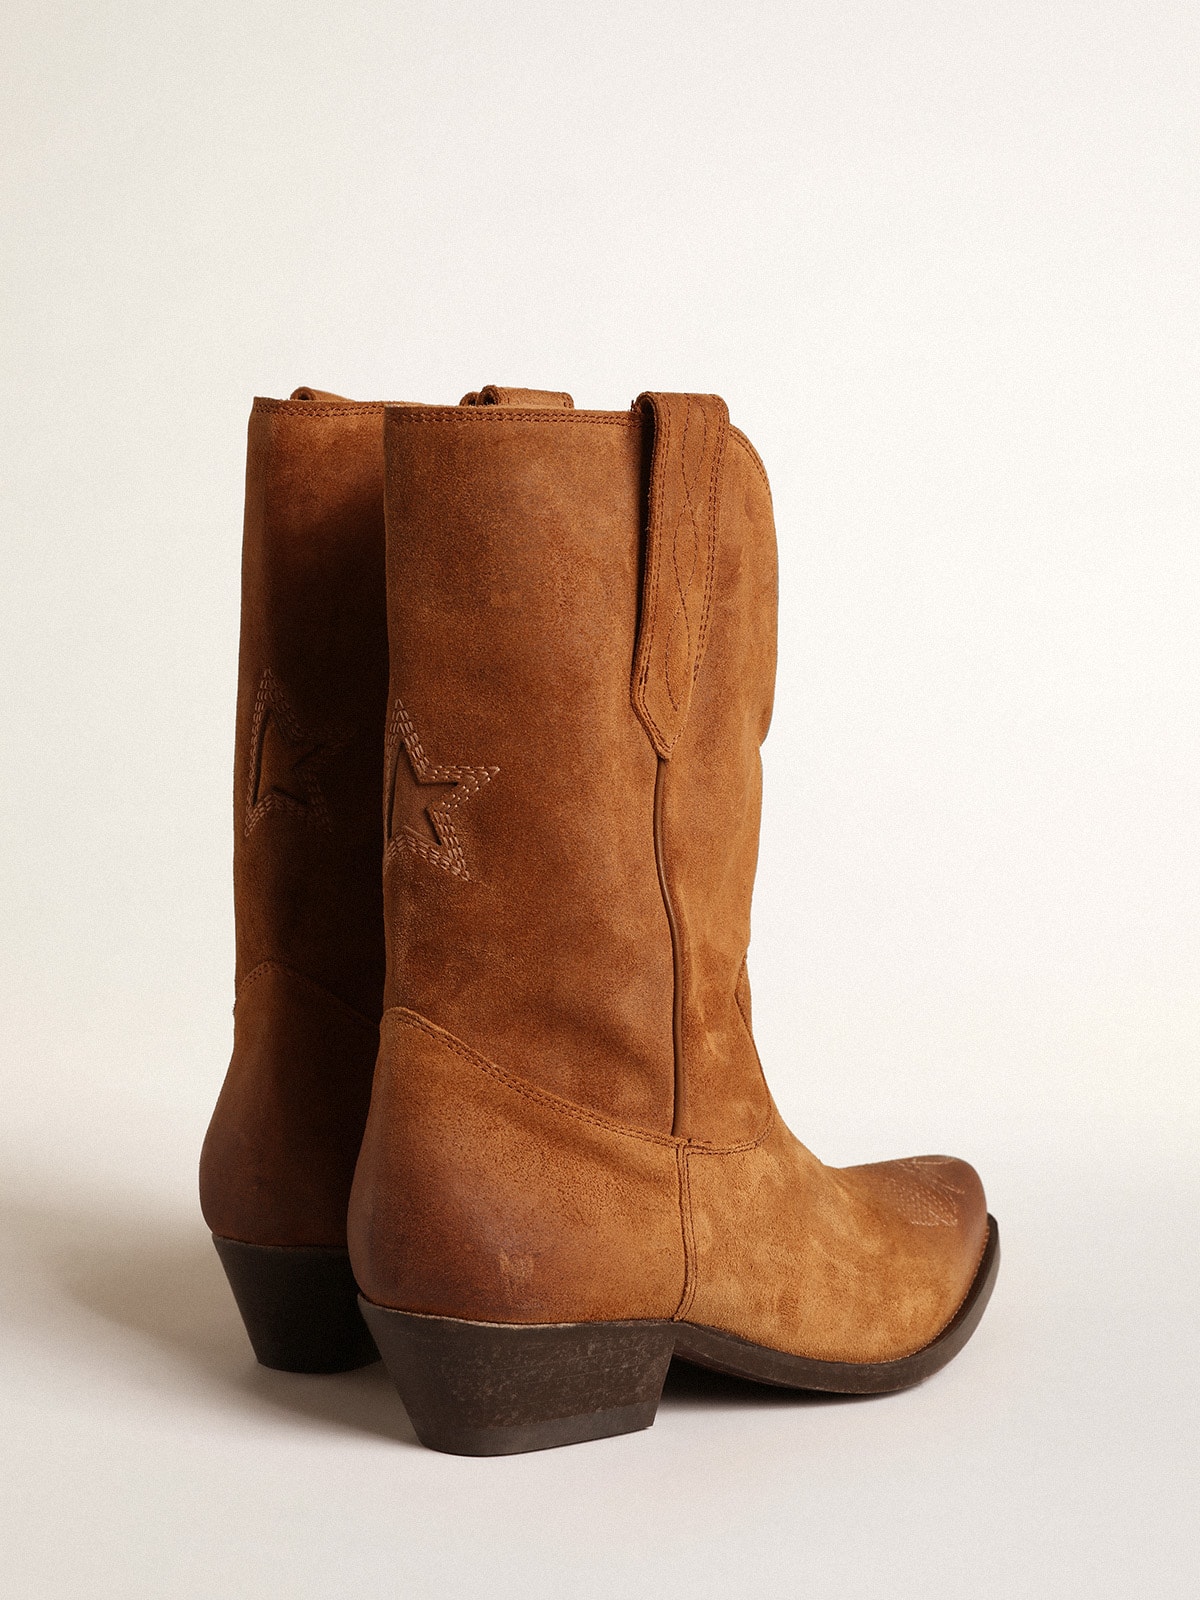 Low Wish Star boots in cognac-colored suede with inlay star